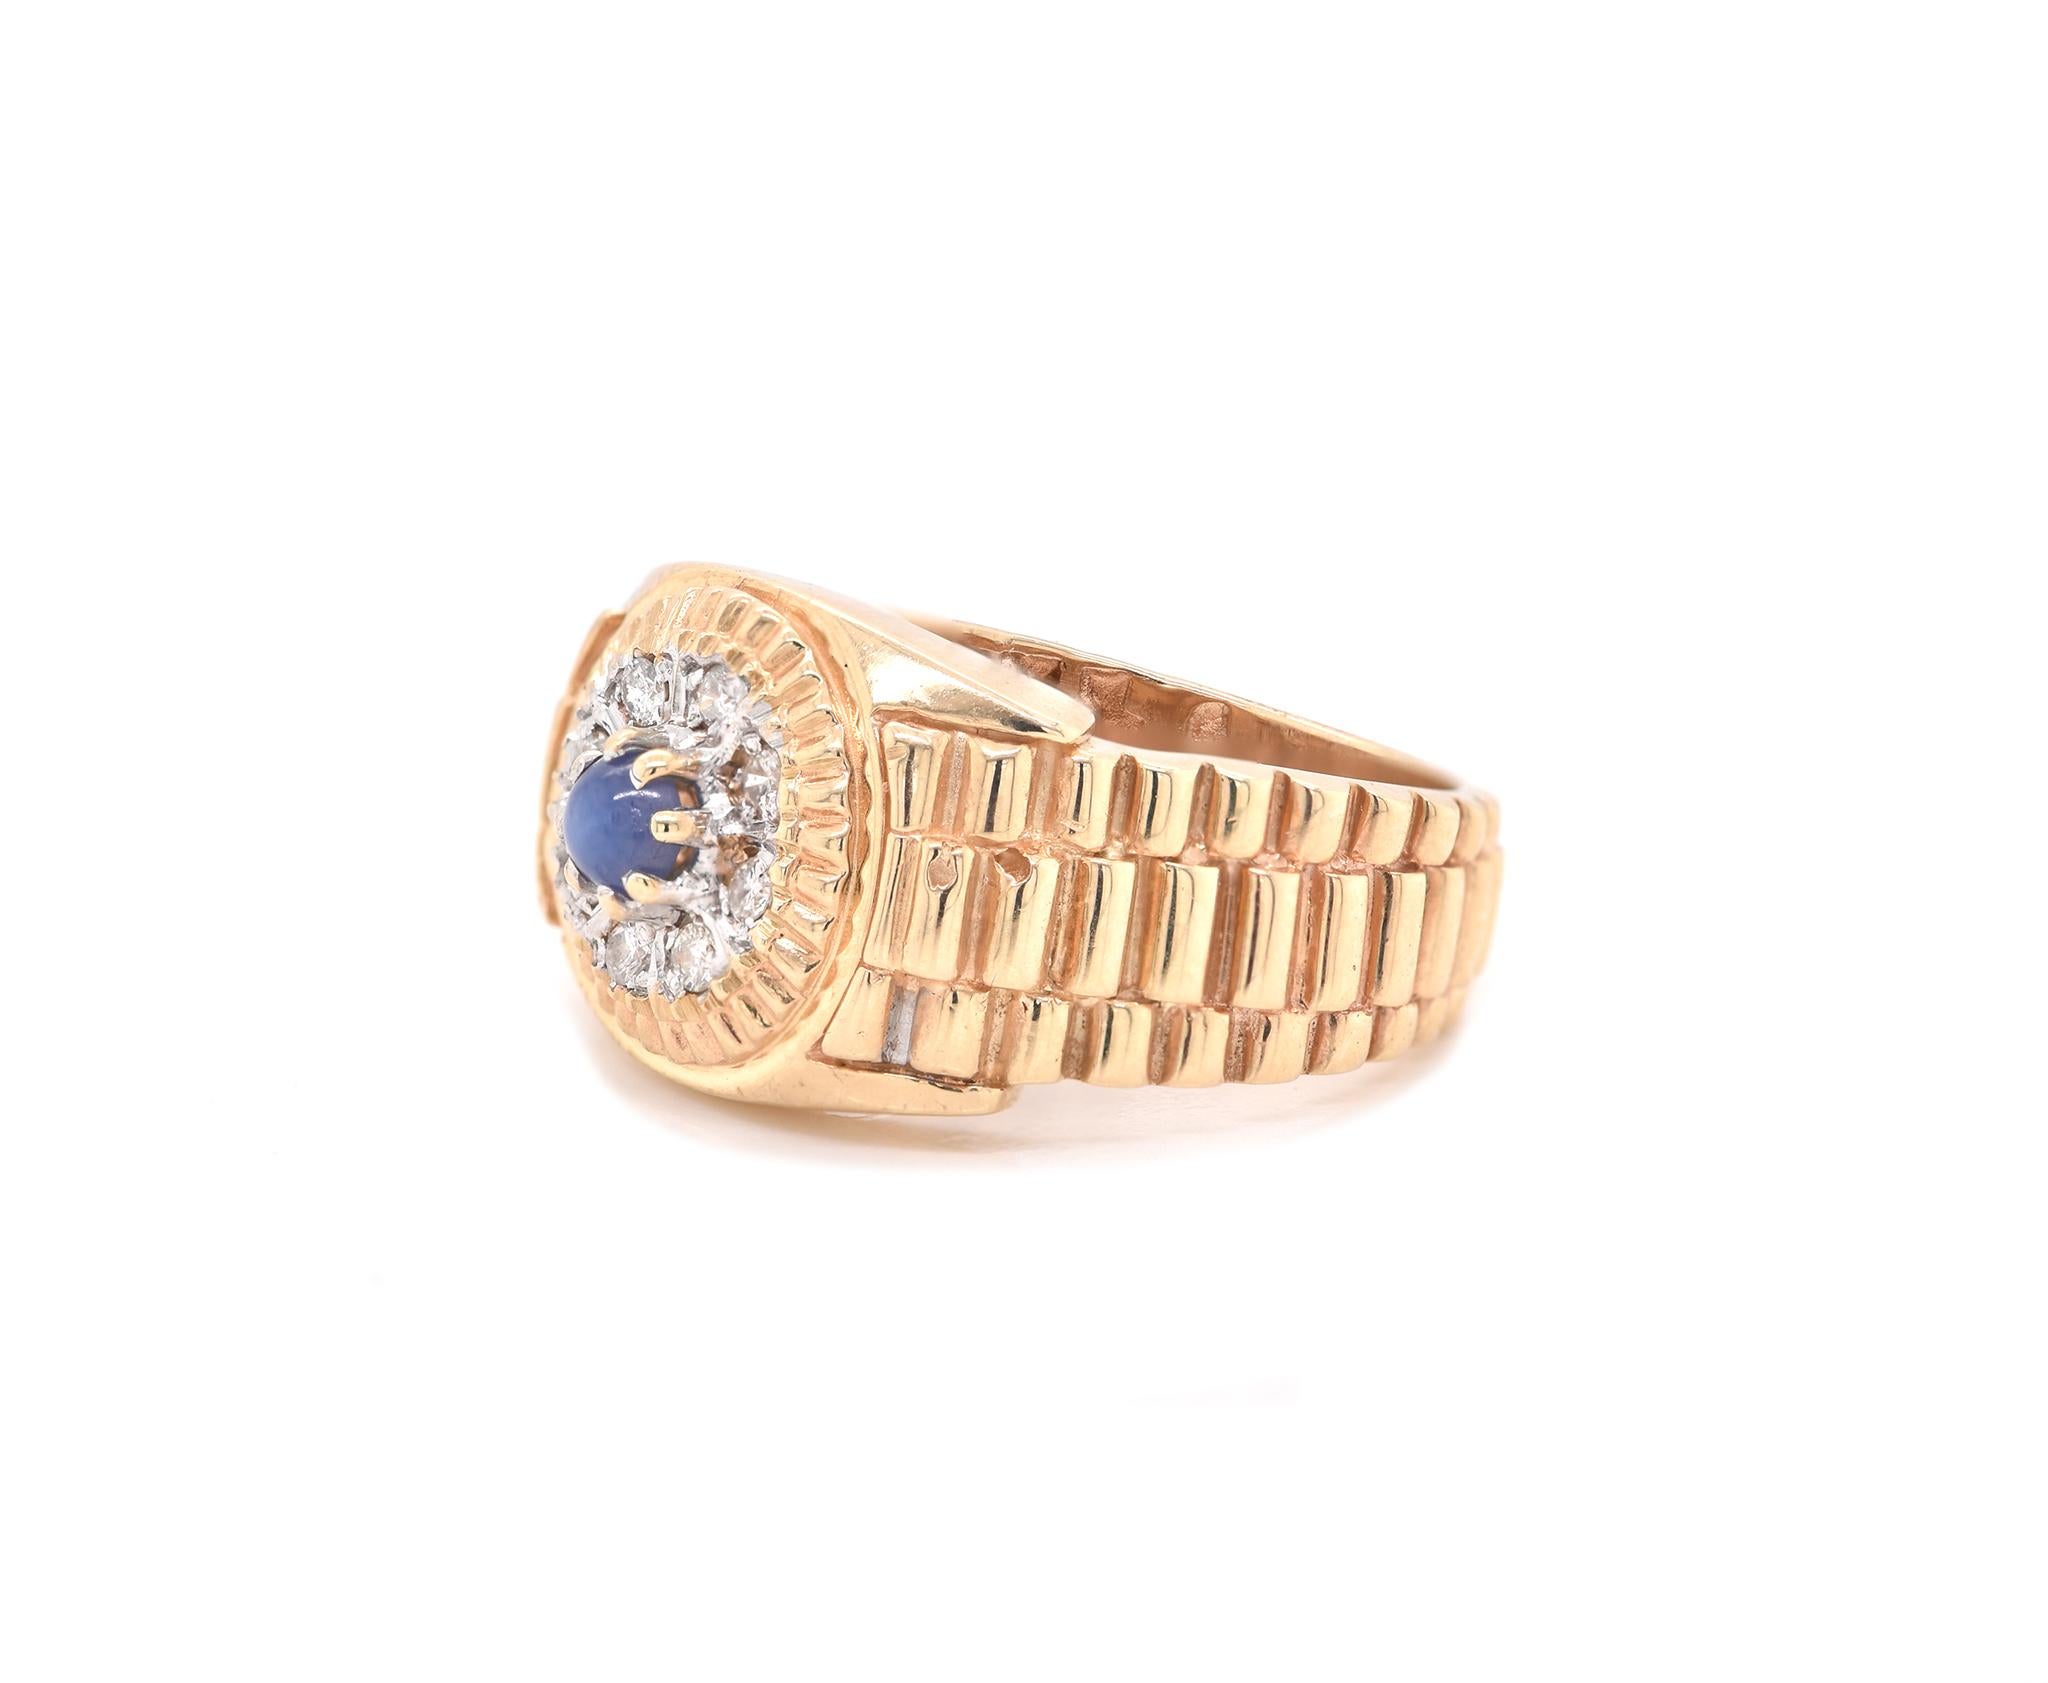 Material: 14K yellow gold
Diamond: 8 round cut = .25cttw
Color: H
Clarity: SI1
Ring Size: 10.5 (please allow up to 2 additional business days for sizing requests)
Dimensions: ring top measures 14.65mm wide
Weight: 12.40 grams
